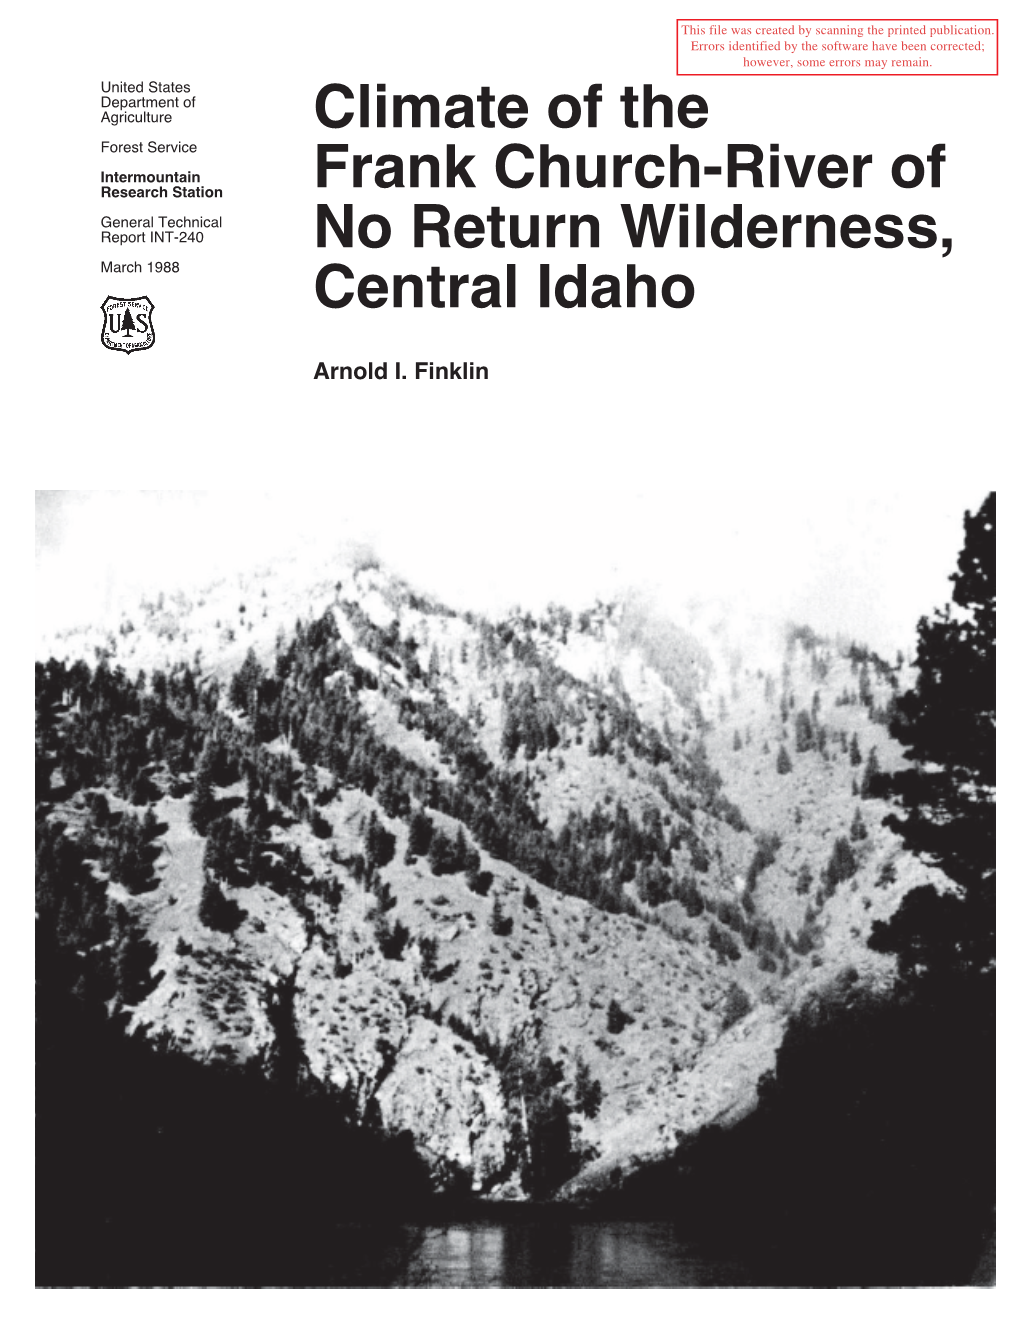 Climate of the Frank Church-River of No Return Wilderness, Central Idaho